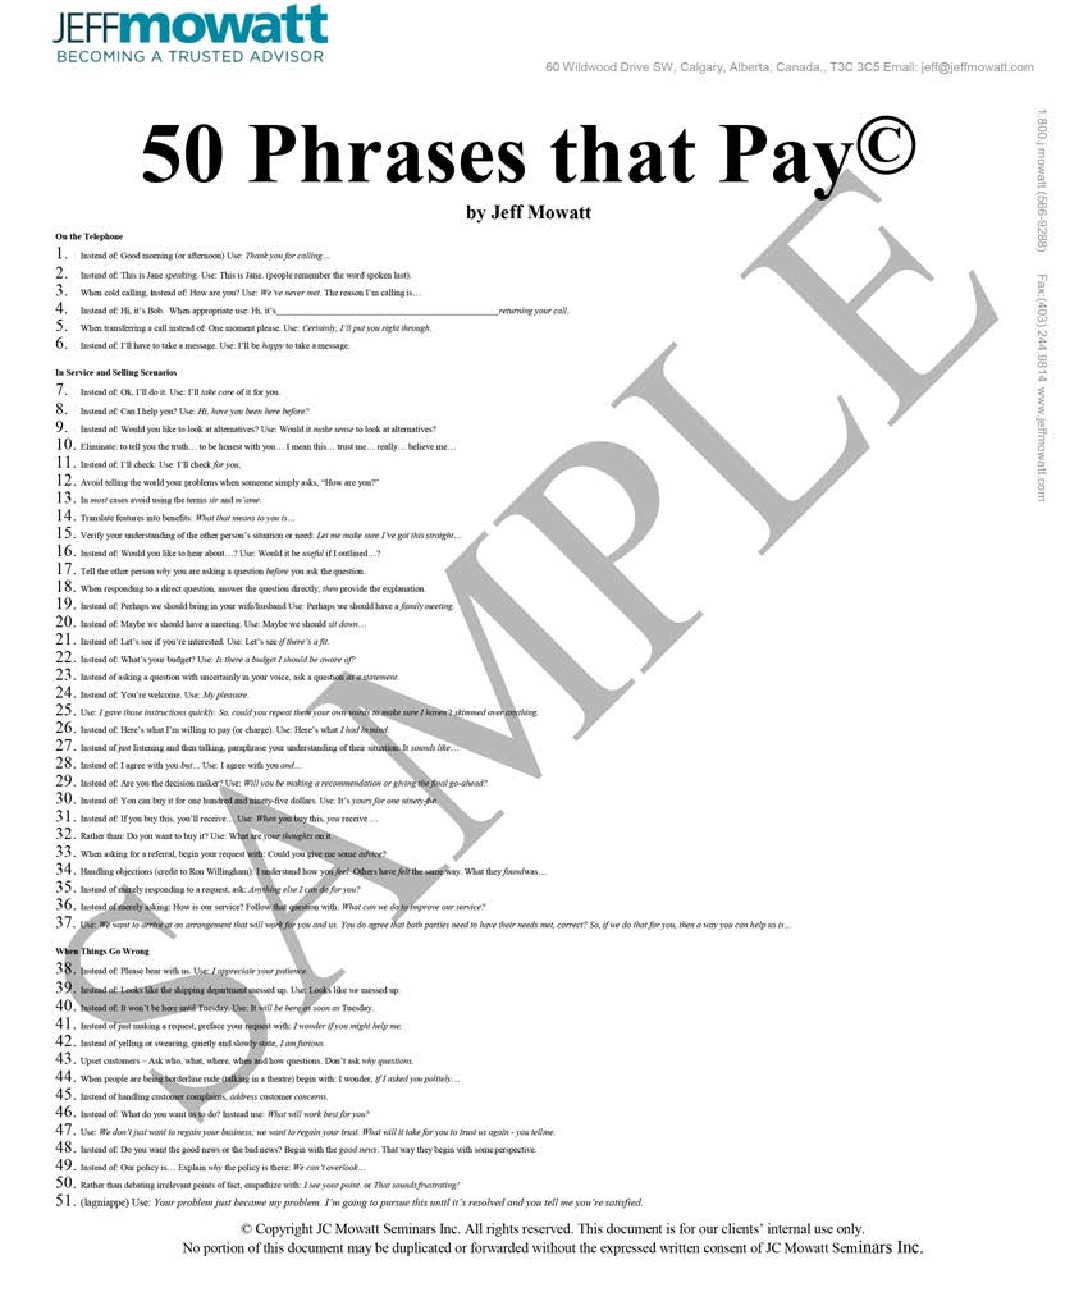 50 Phrases that Pay for website sample